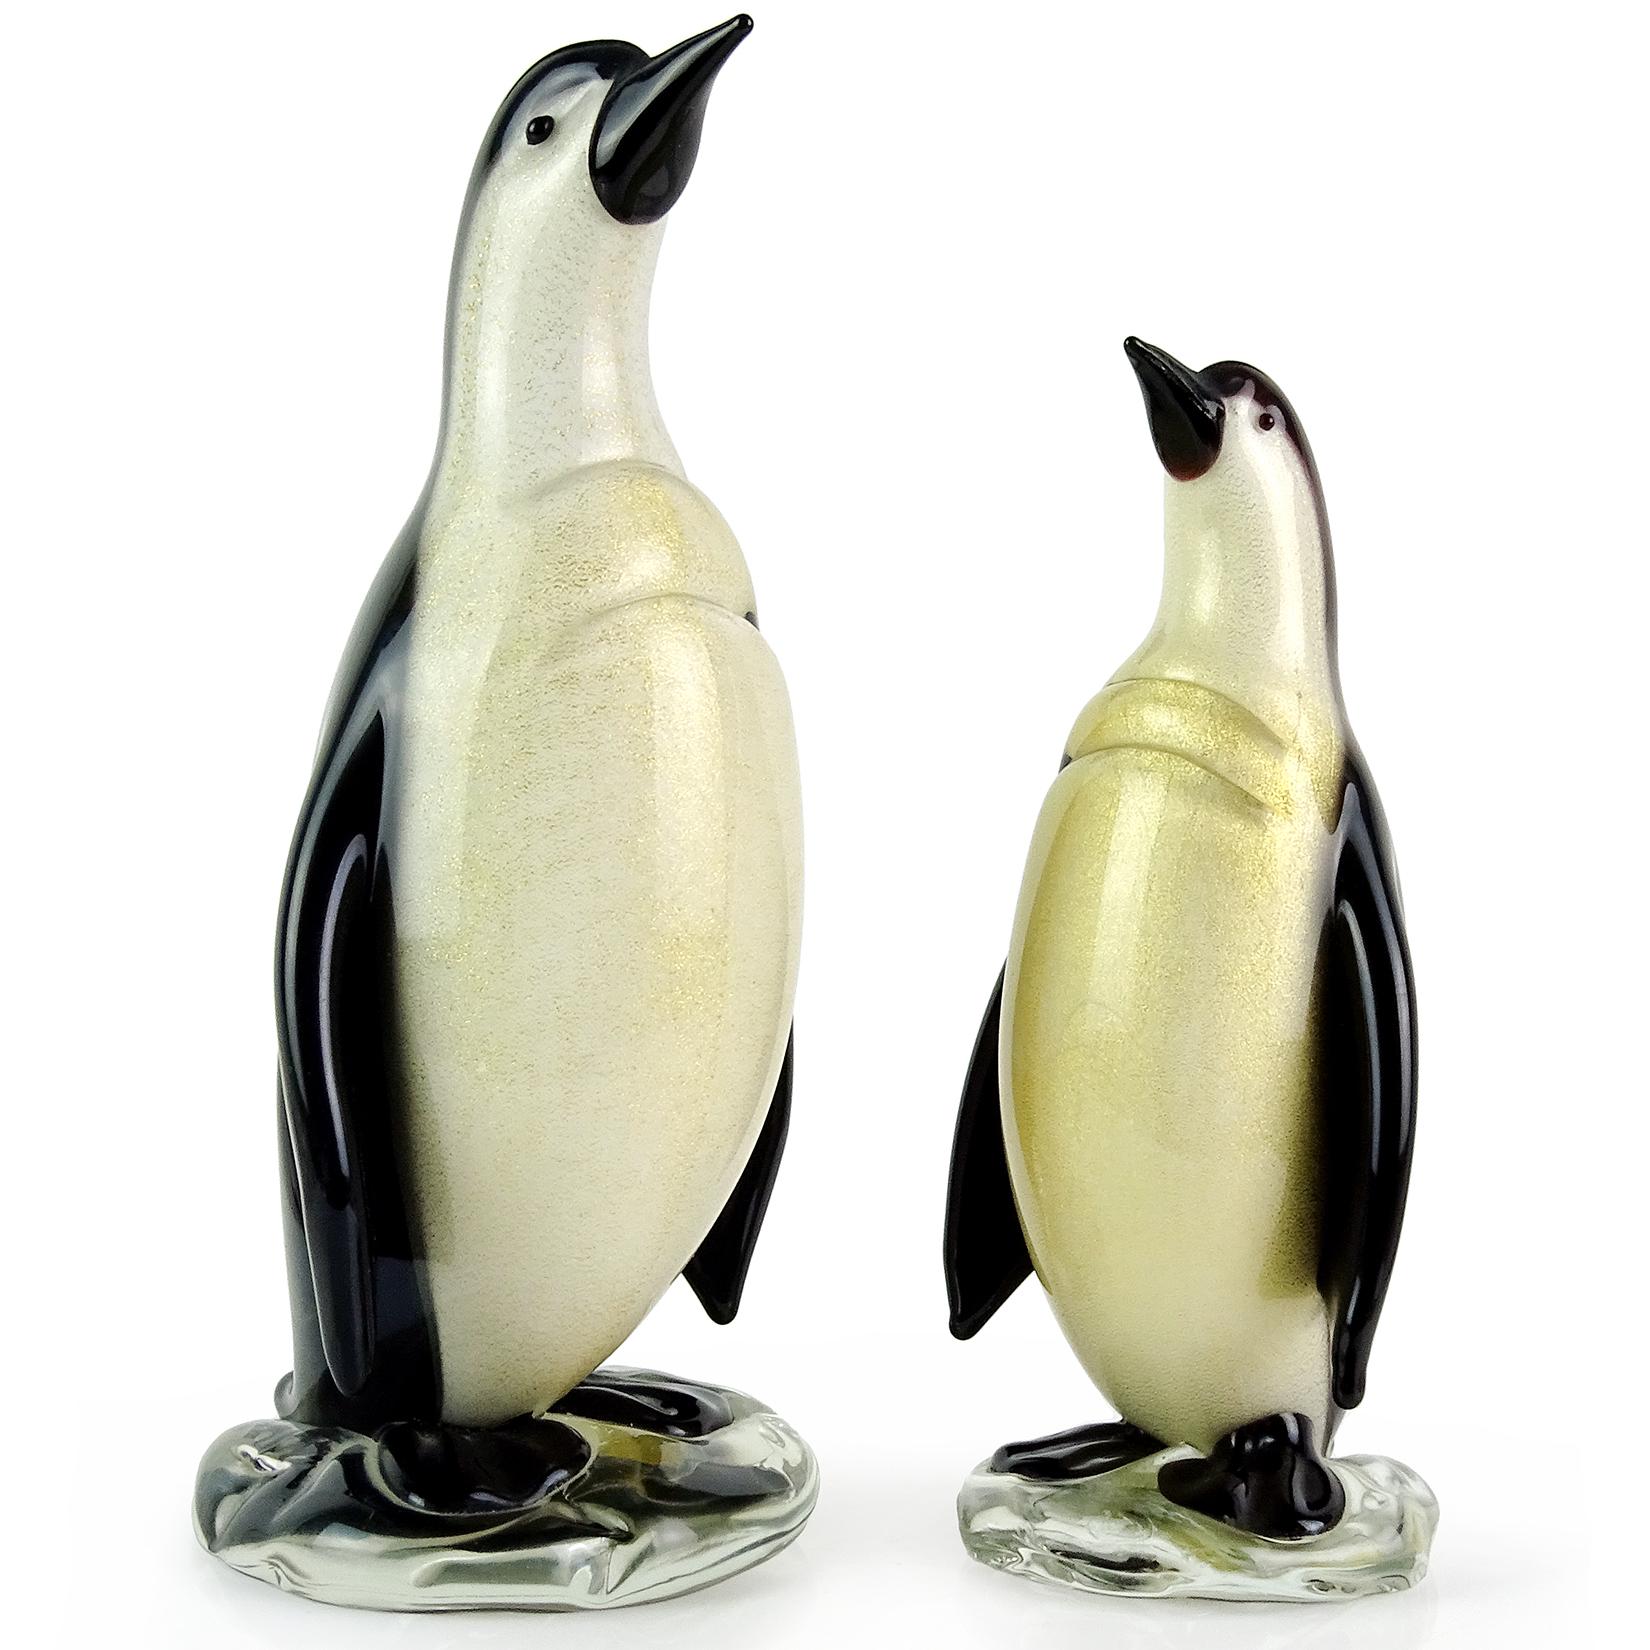 Beautiful Murano hand blown black, white and gold flecks Italian art glass penguin sculptures. Documented to designer Alfredo Barbini, with original gallery item labels. Published in his catalog as well. They are both covered in gold leaf, and stand